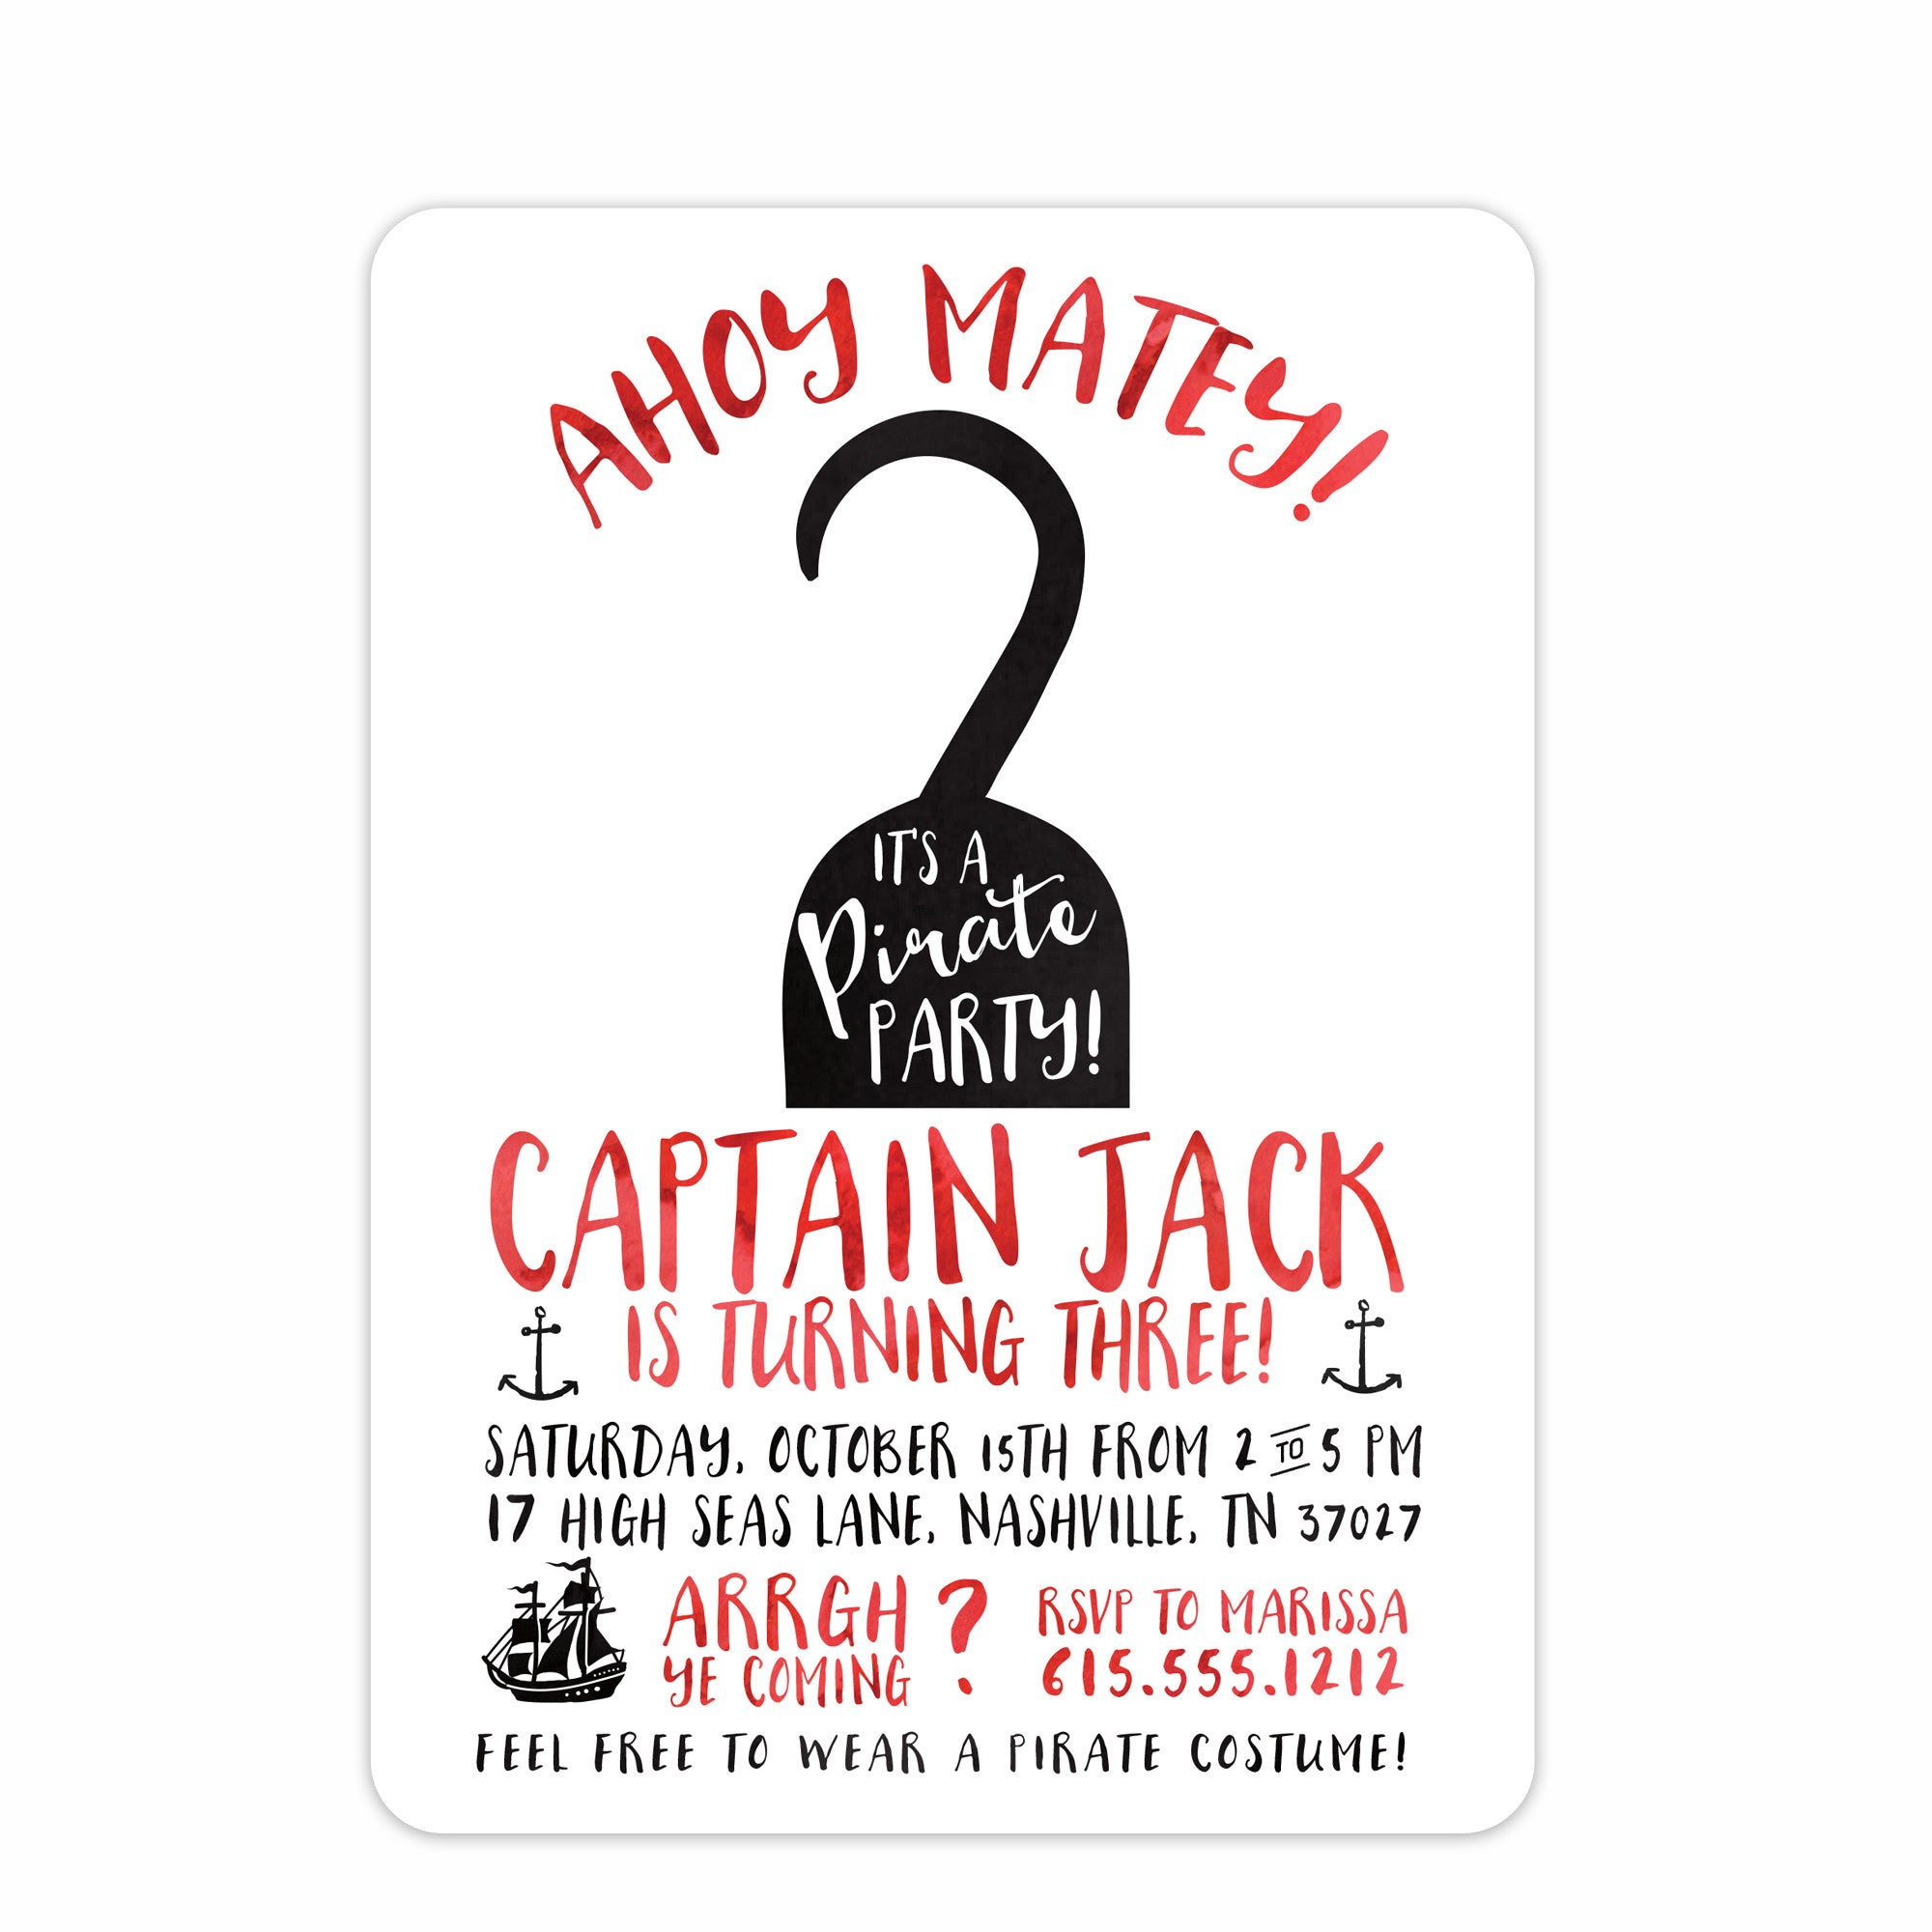 Hook Pirate Birthday Invitation, great for a pirate and mermaid party, or a pool party. Printed on premium heavyweight cardstock from Pipsy.com, front